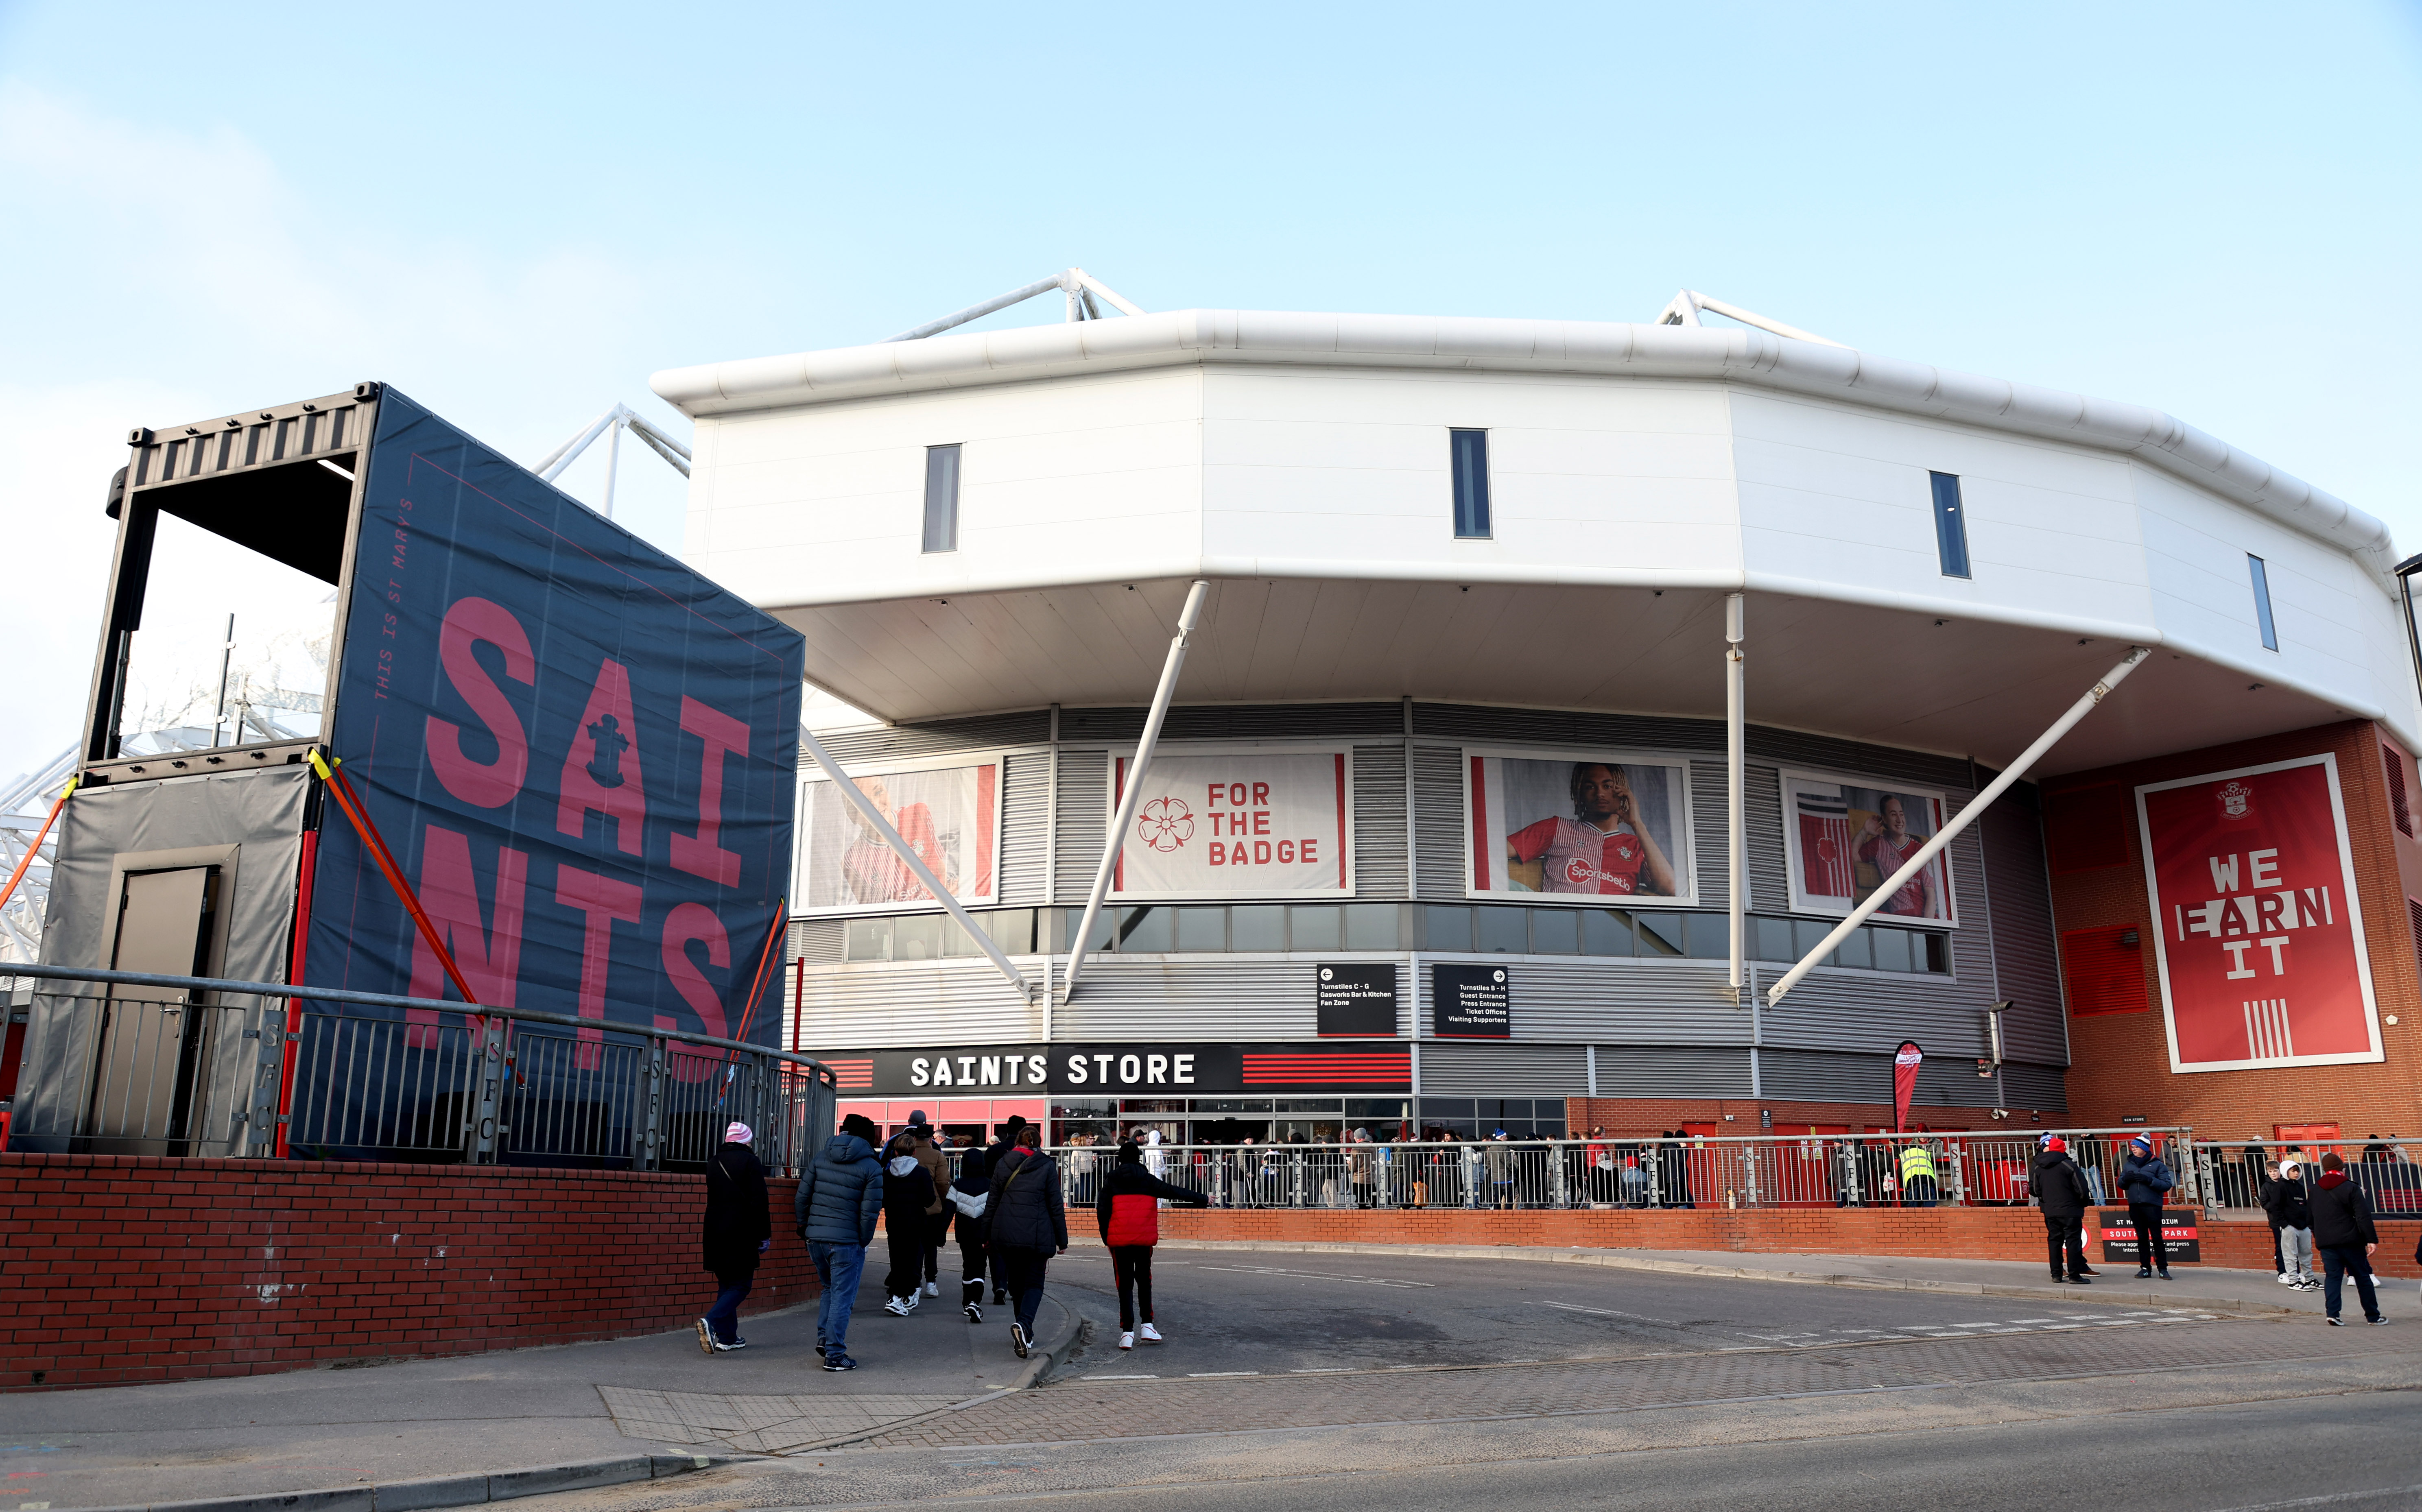 St Mary's Stadium from the outside